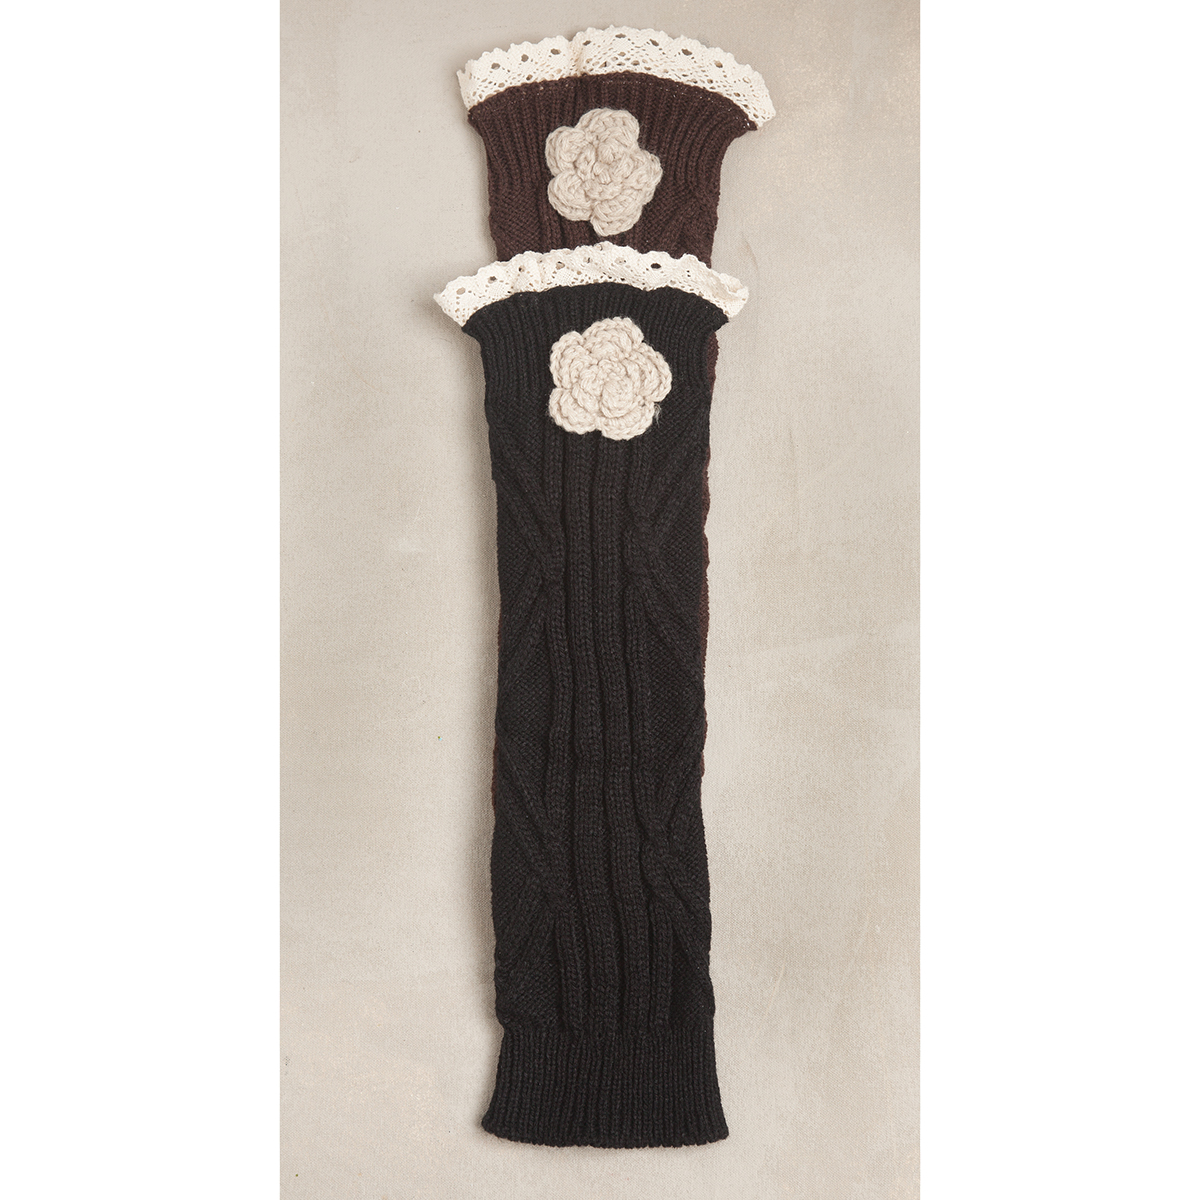 b70 BOOT CUFF LACE BROWN TALL 4.5IN X 16.5IN KNIT